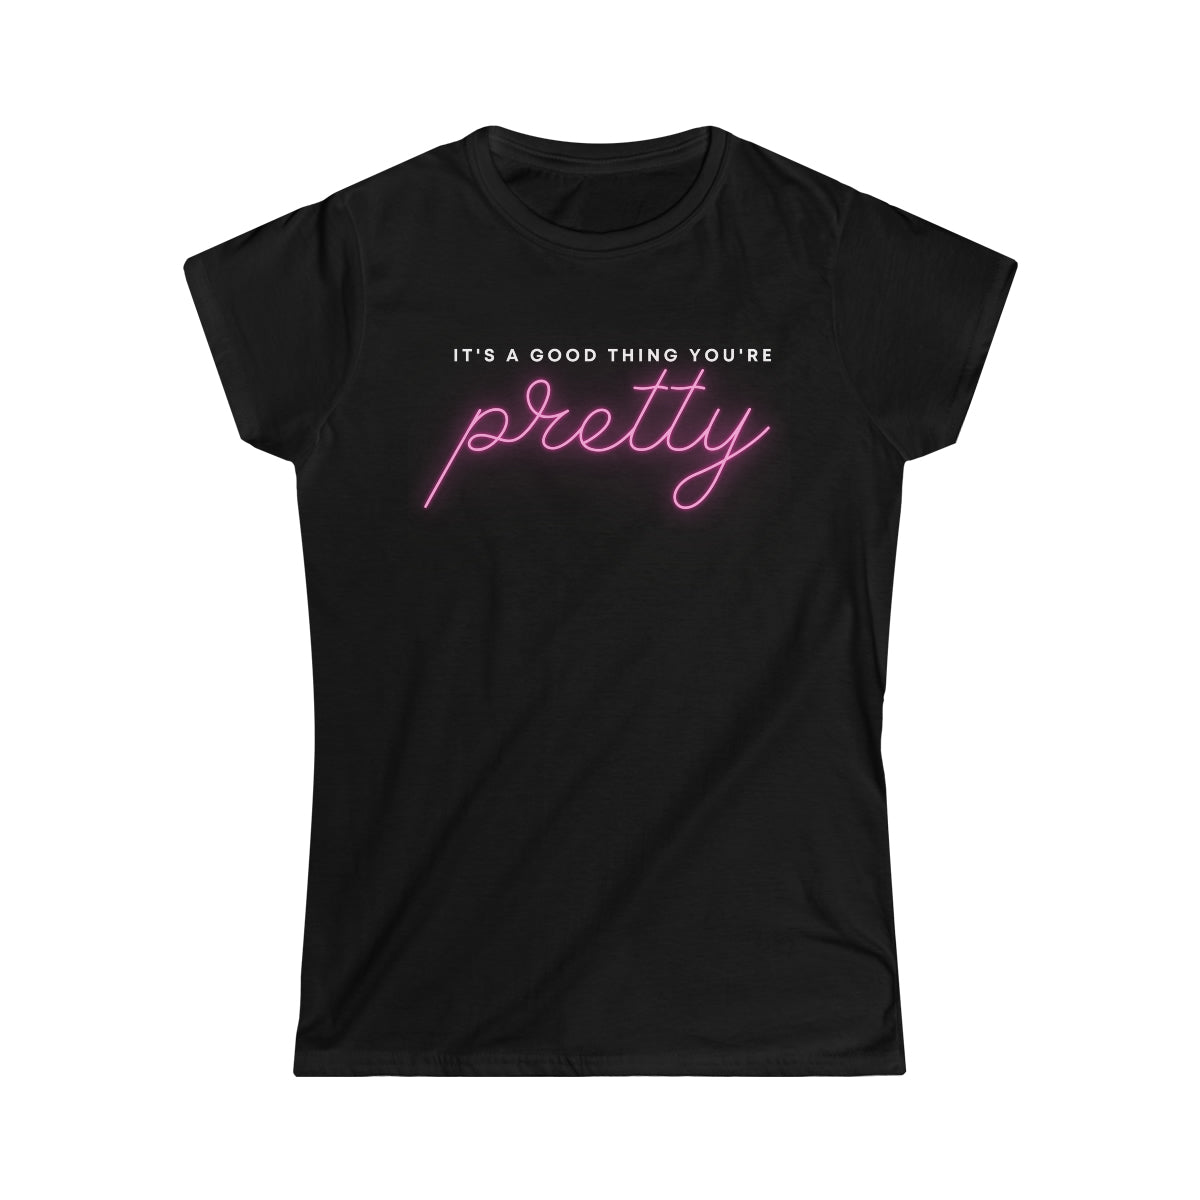 It's a Good Thing You're Pretty Tee